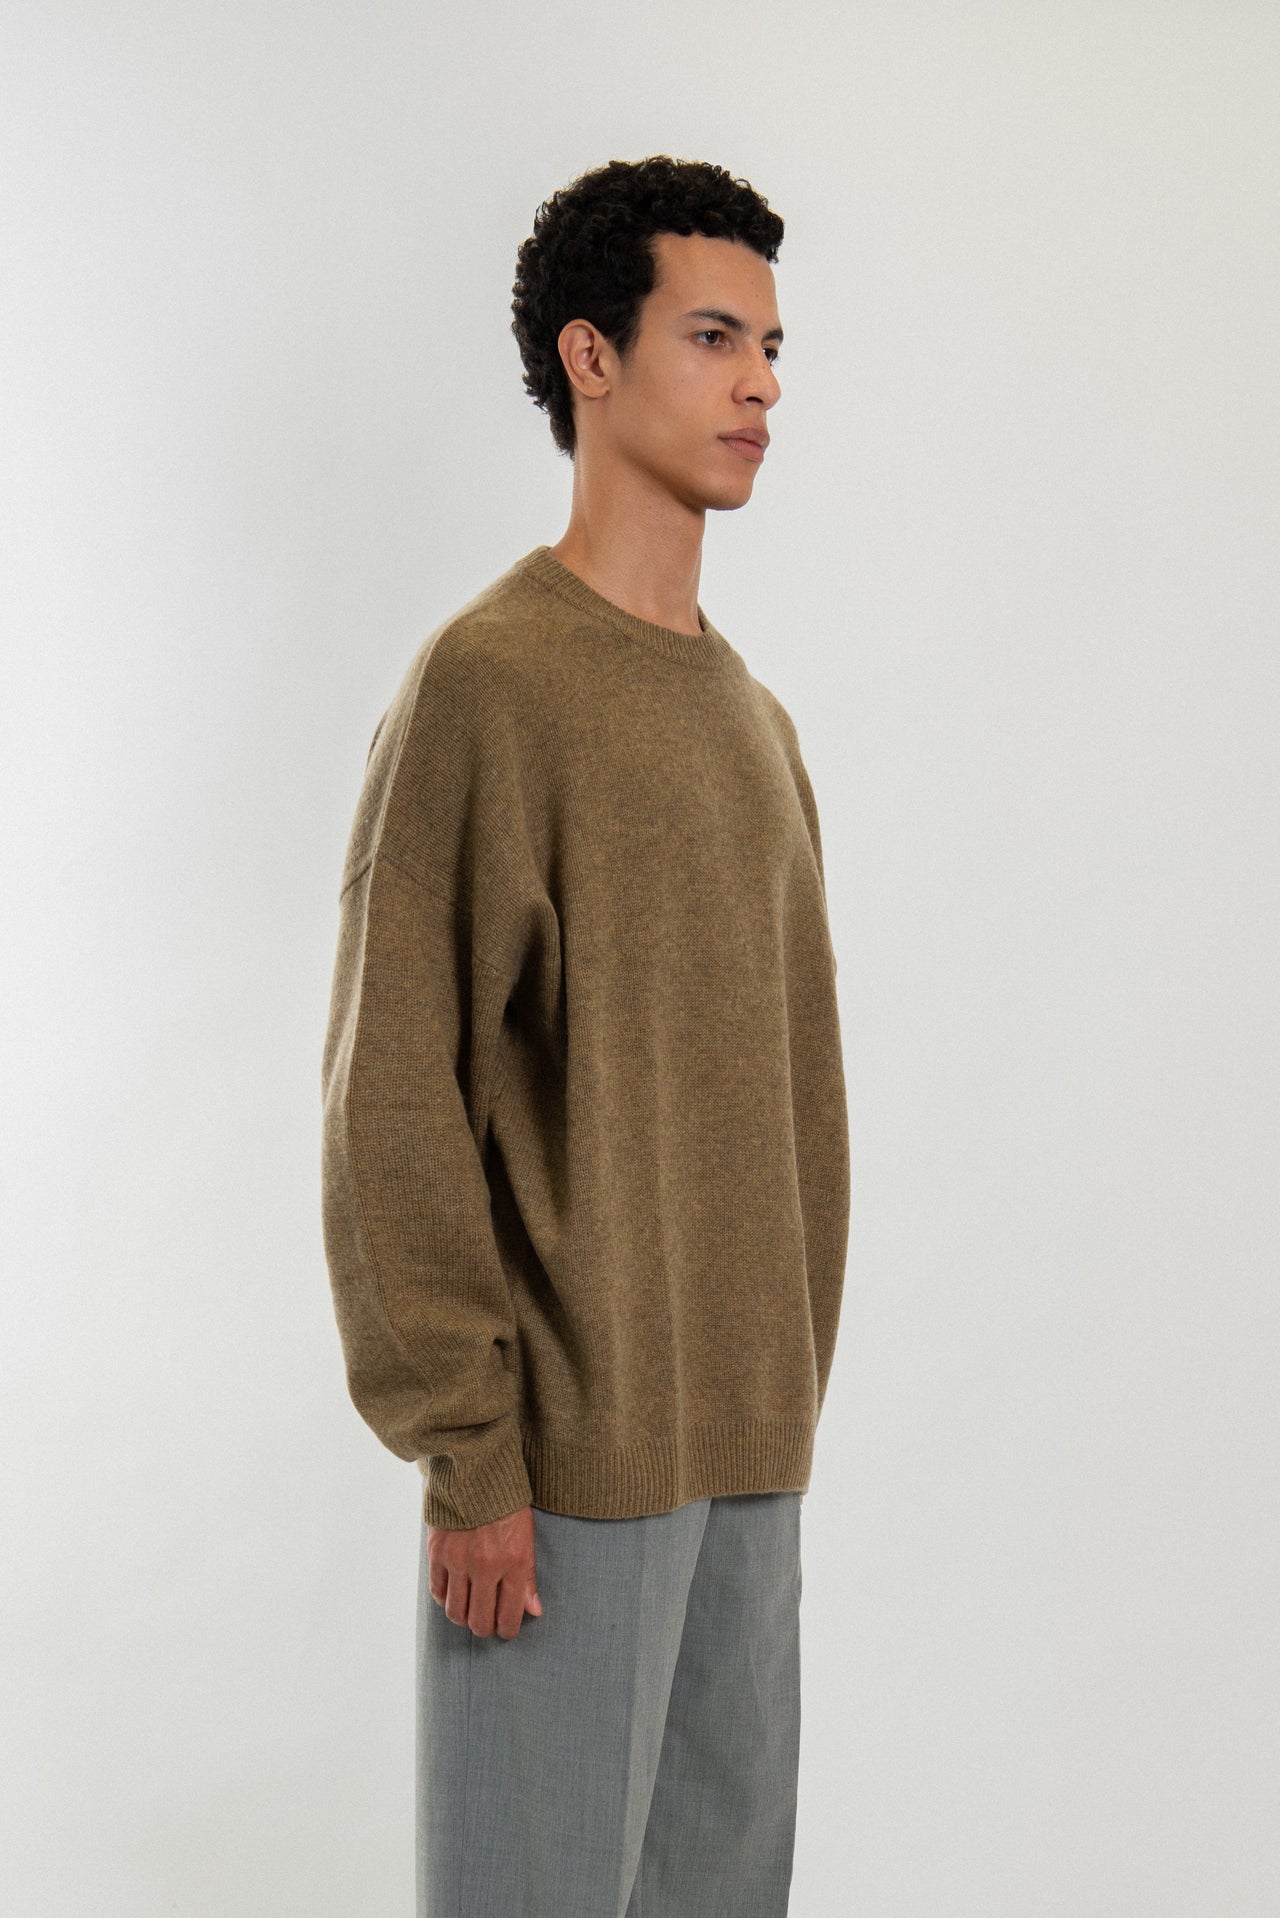 Wool and Cashmere blend crew-neck sweater